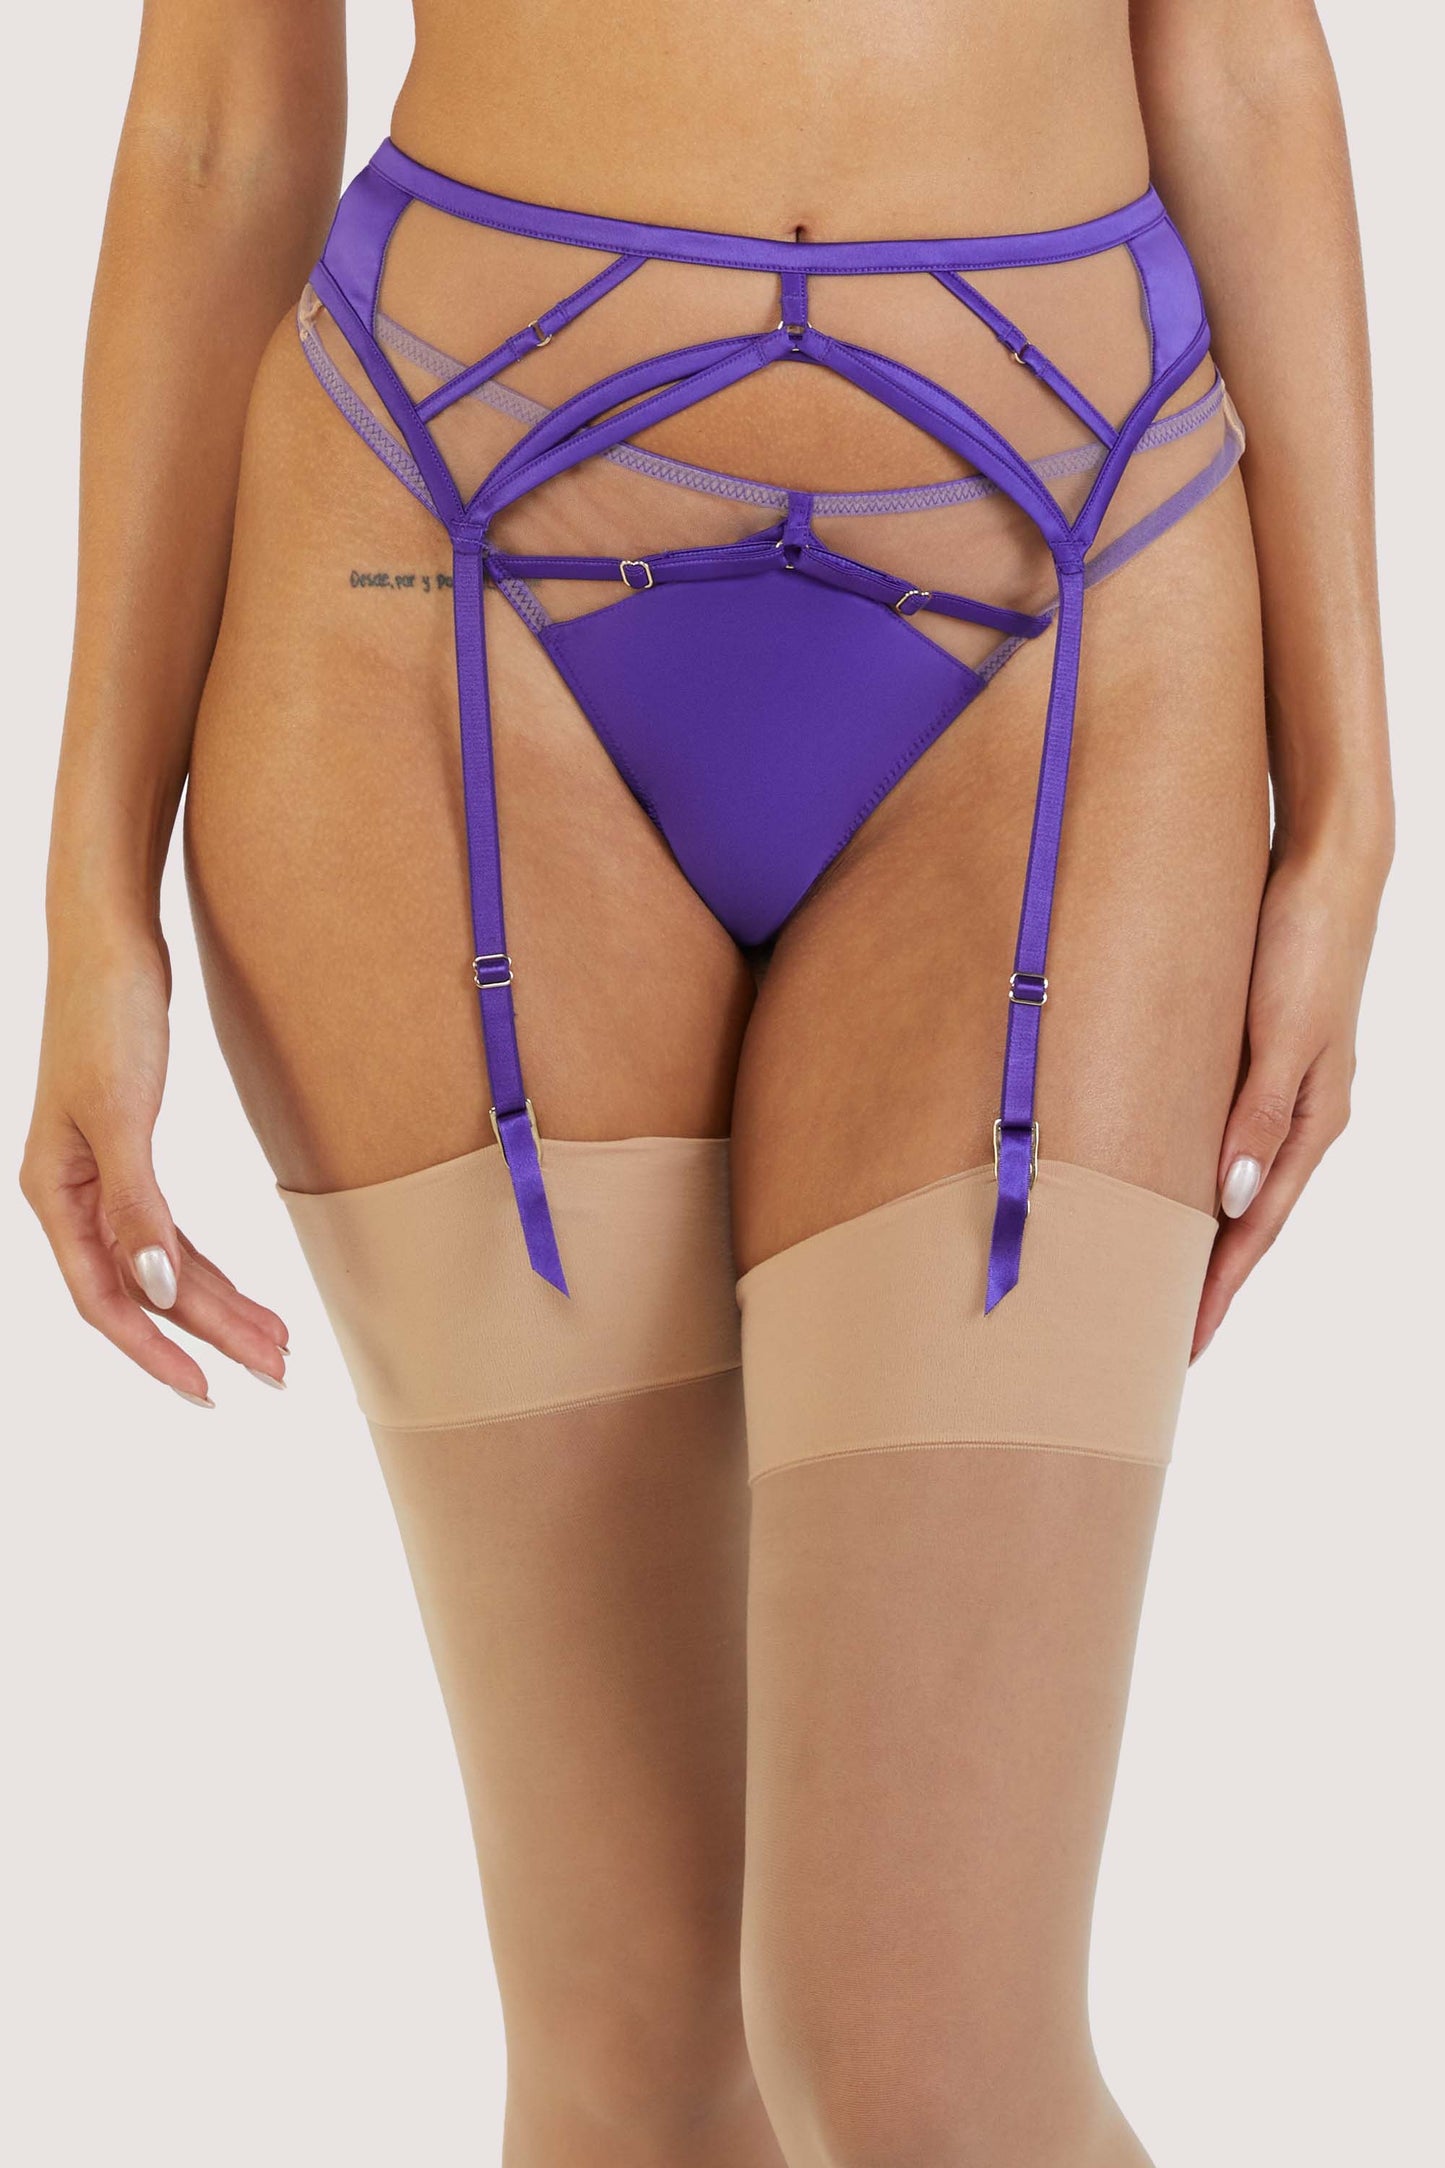 Ramona in Purple Strap Detail Illusion Mesh Suspender By Playful Promises - sizes 4-22